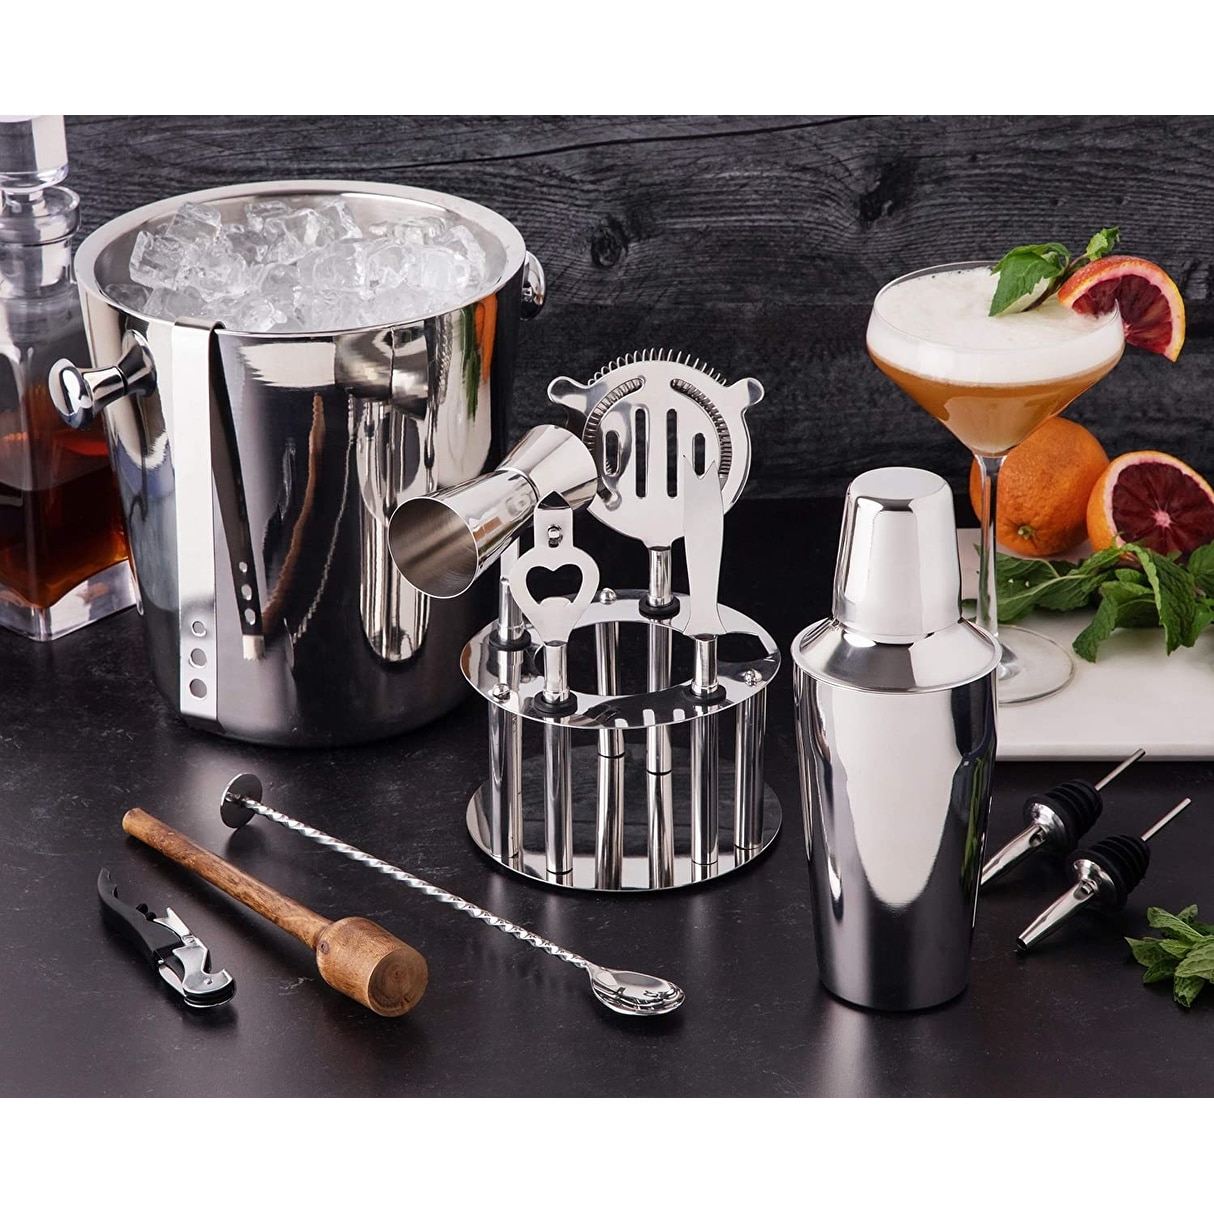 https://ak1.ostkcdn.com/images/products/is/images/direct/936150986eee2cde1c982d99aeac09d441ed8aca/Barware-Tool-Set-Bartender-Kit-Bar-and-Home-Drink-Making-Tools.jpg